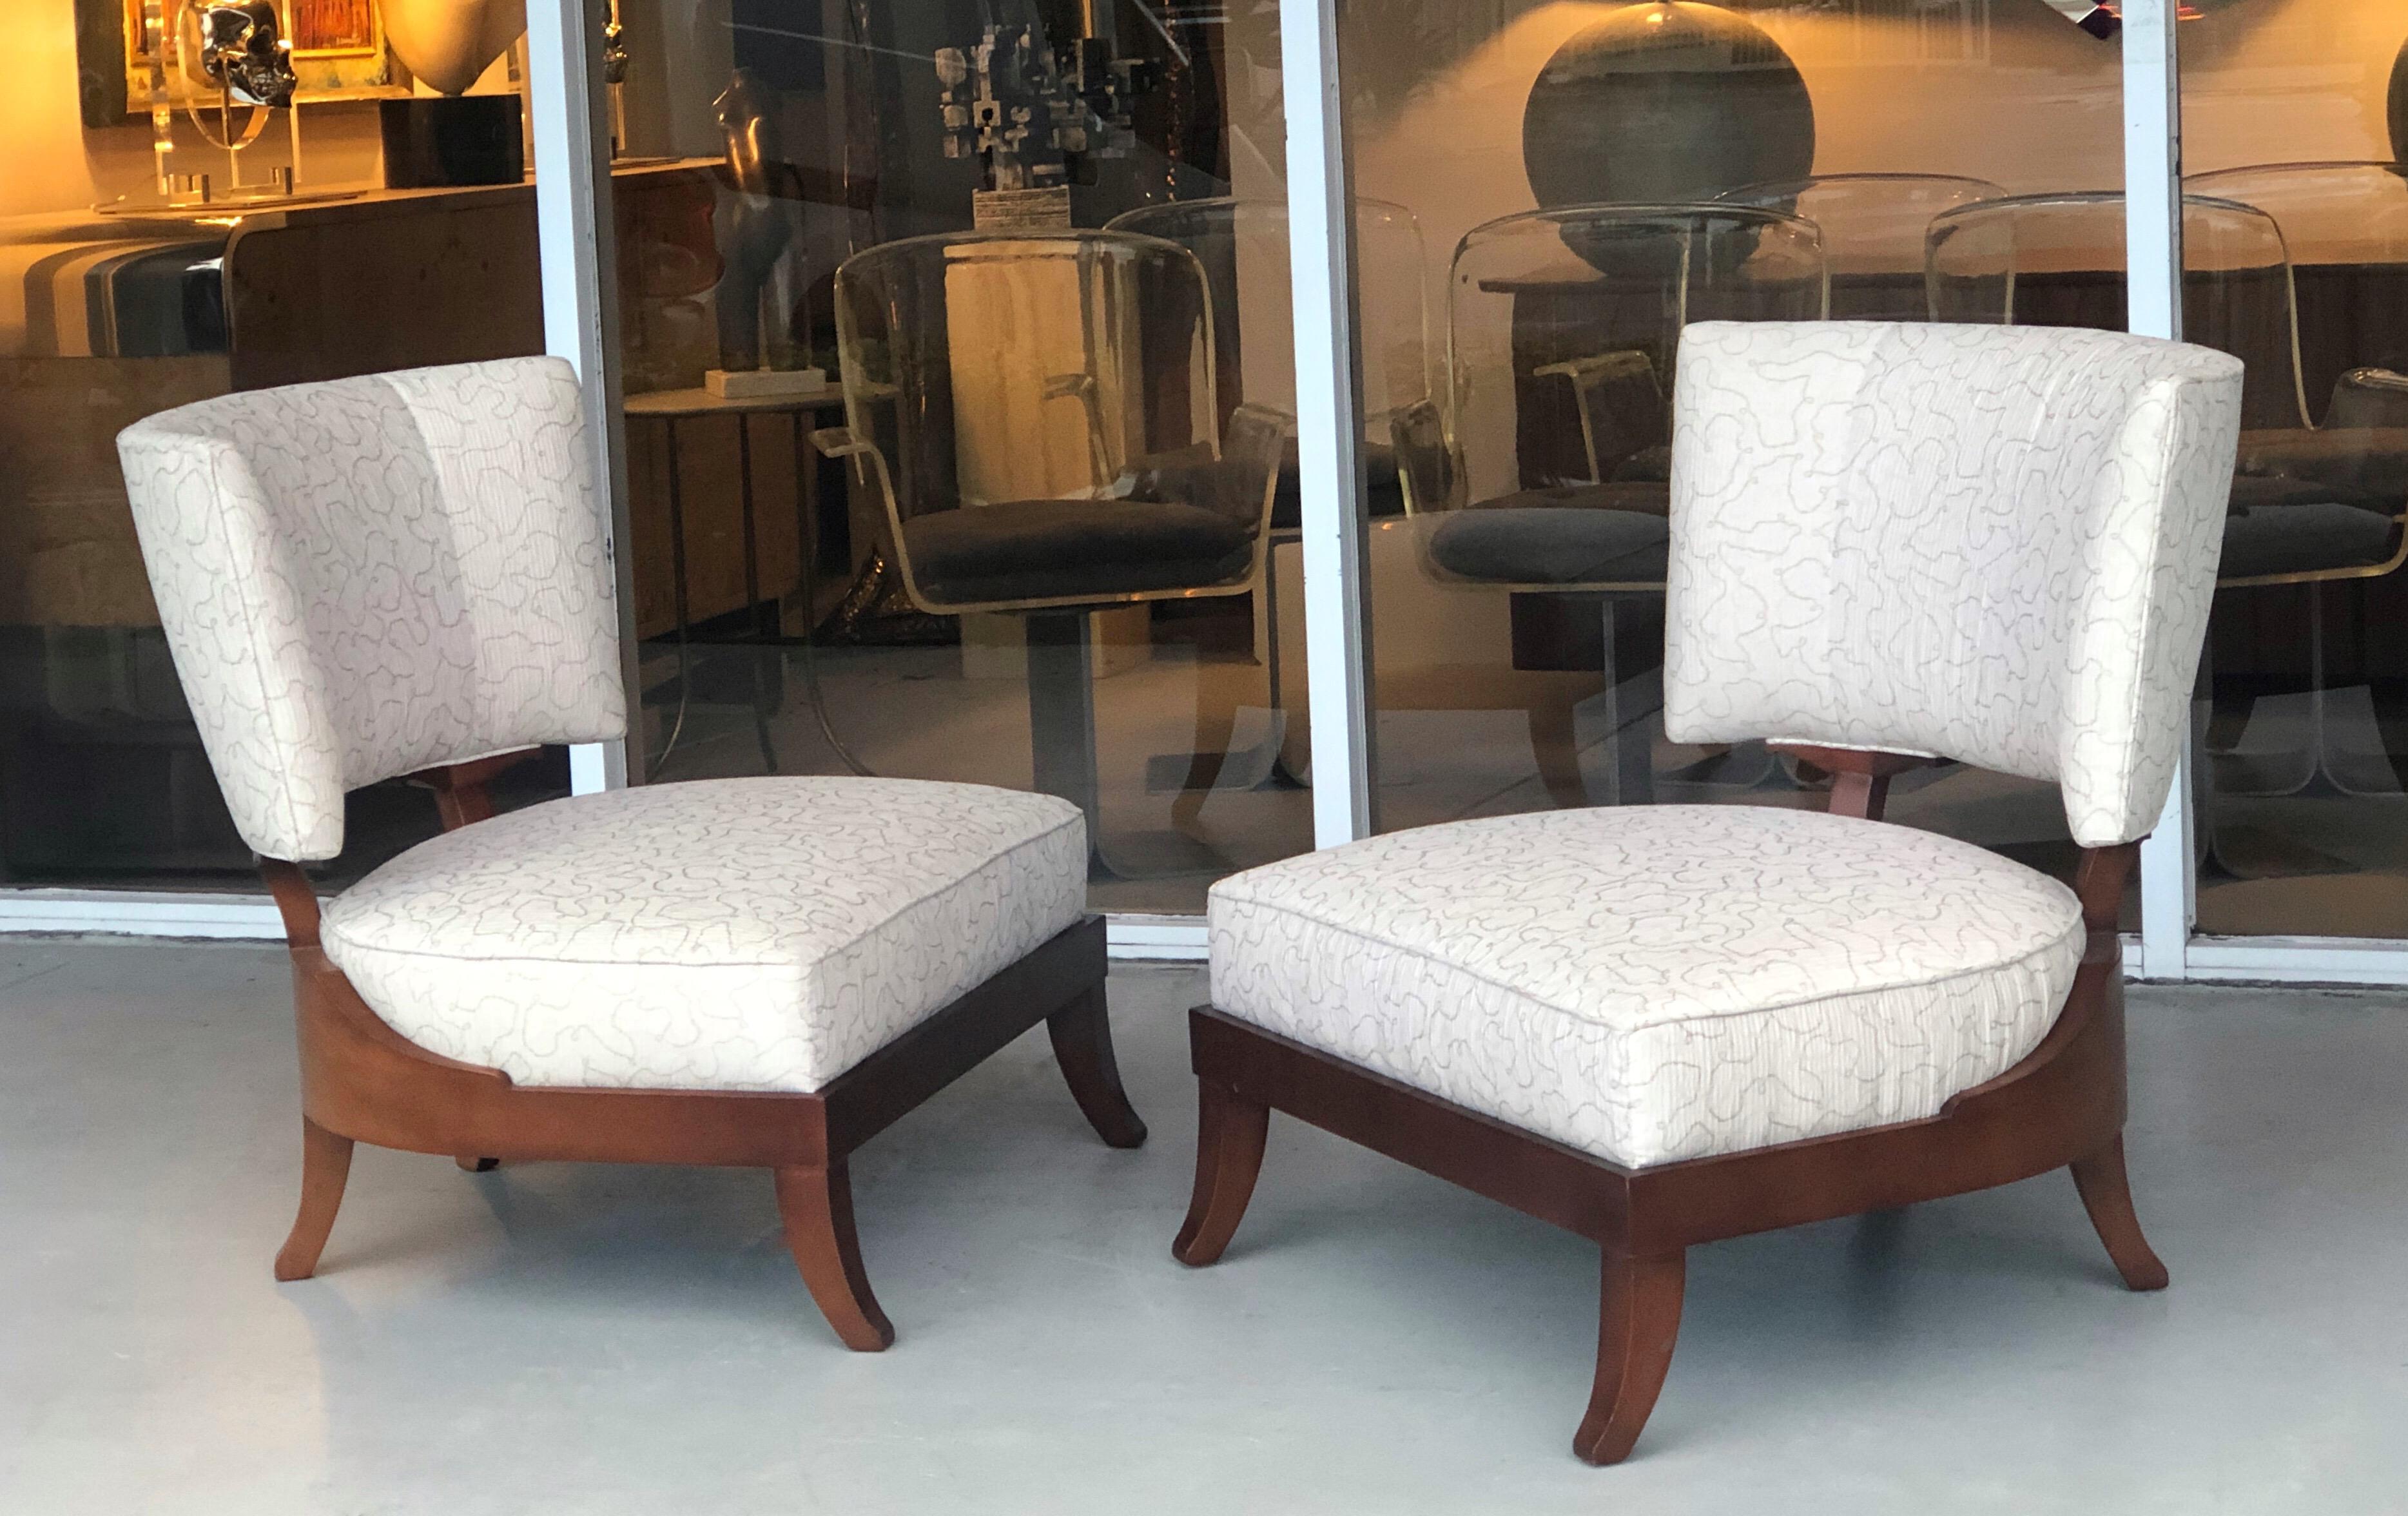 A beautiful pair of vintage chairs by Baker Furniture. Great lines and proportions.